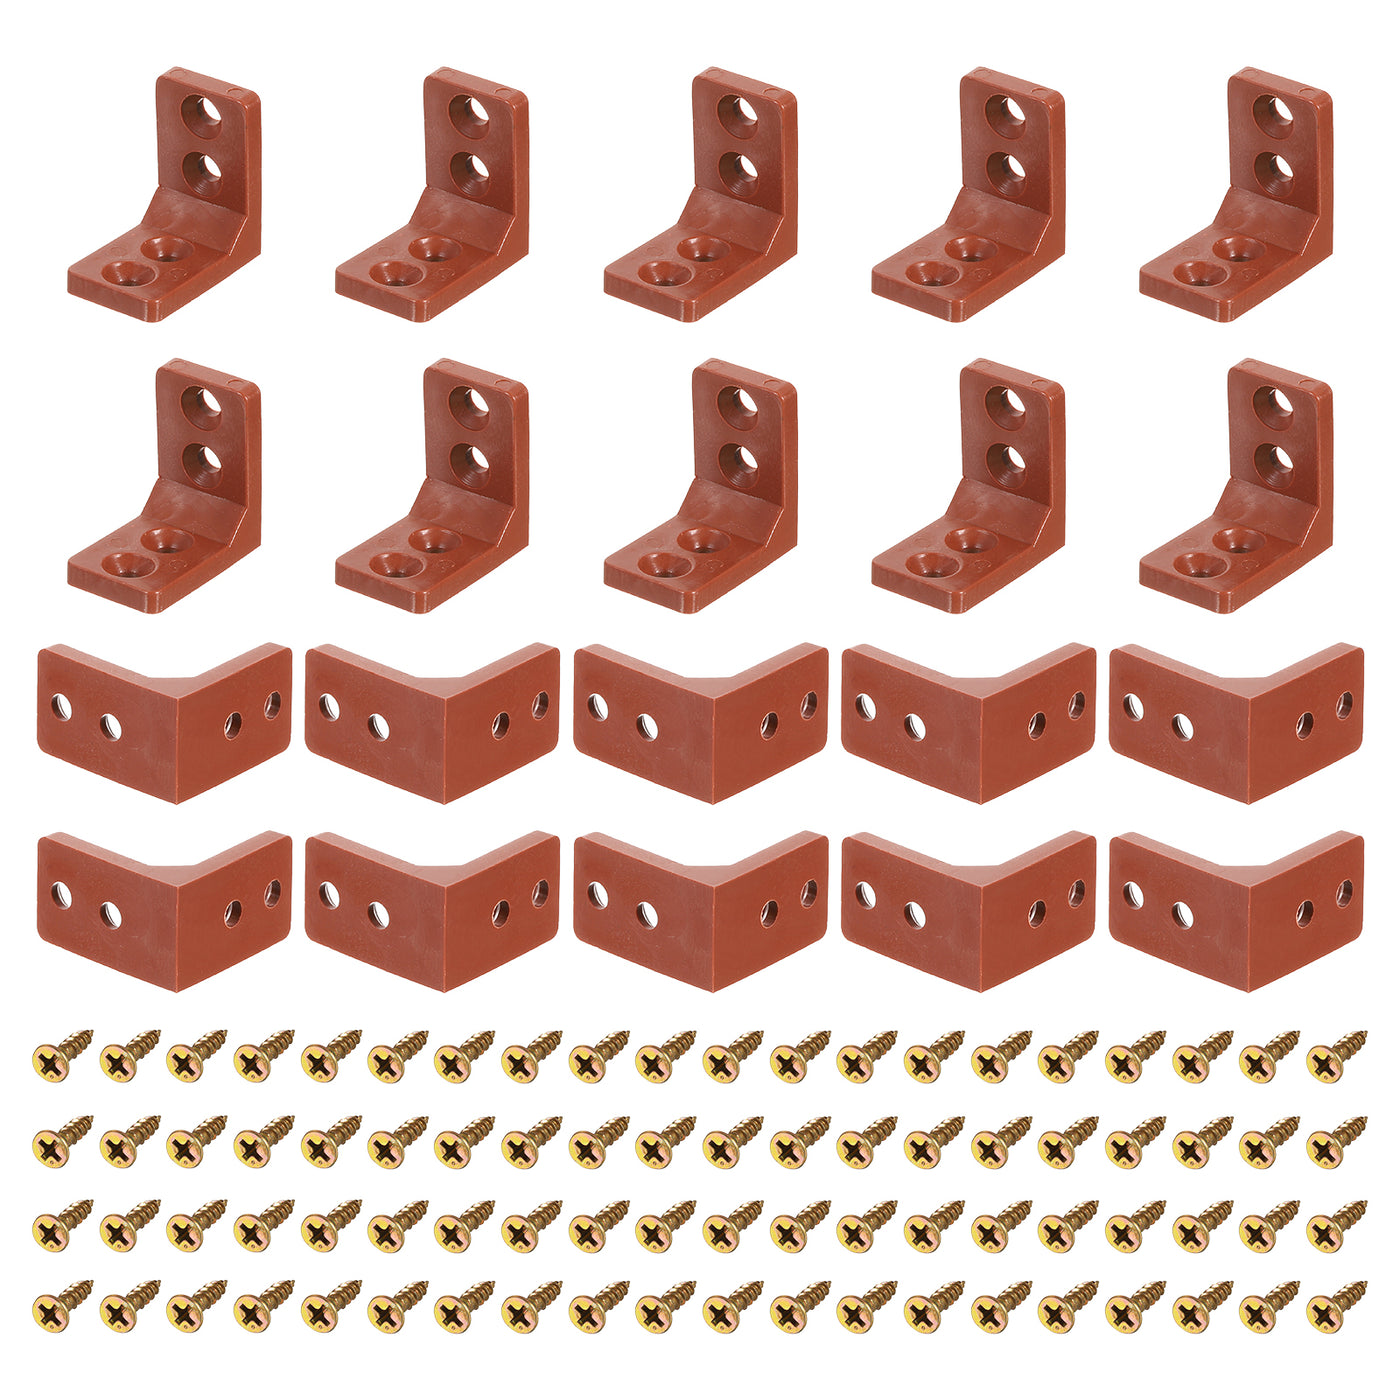 uxcell Uxcell 30Pcs 90 Degree Plastic Corner Braces, 16.5x27x27mm Nylon Shelf Right Angle Brackets with Screws for Cabinets, Cupboards (Red Brown)